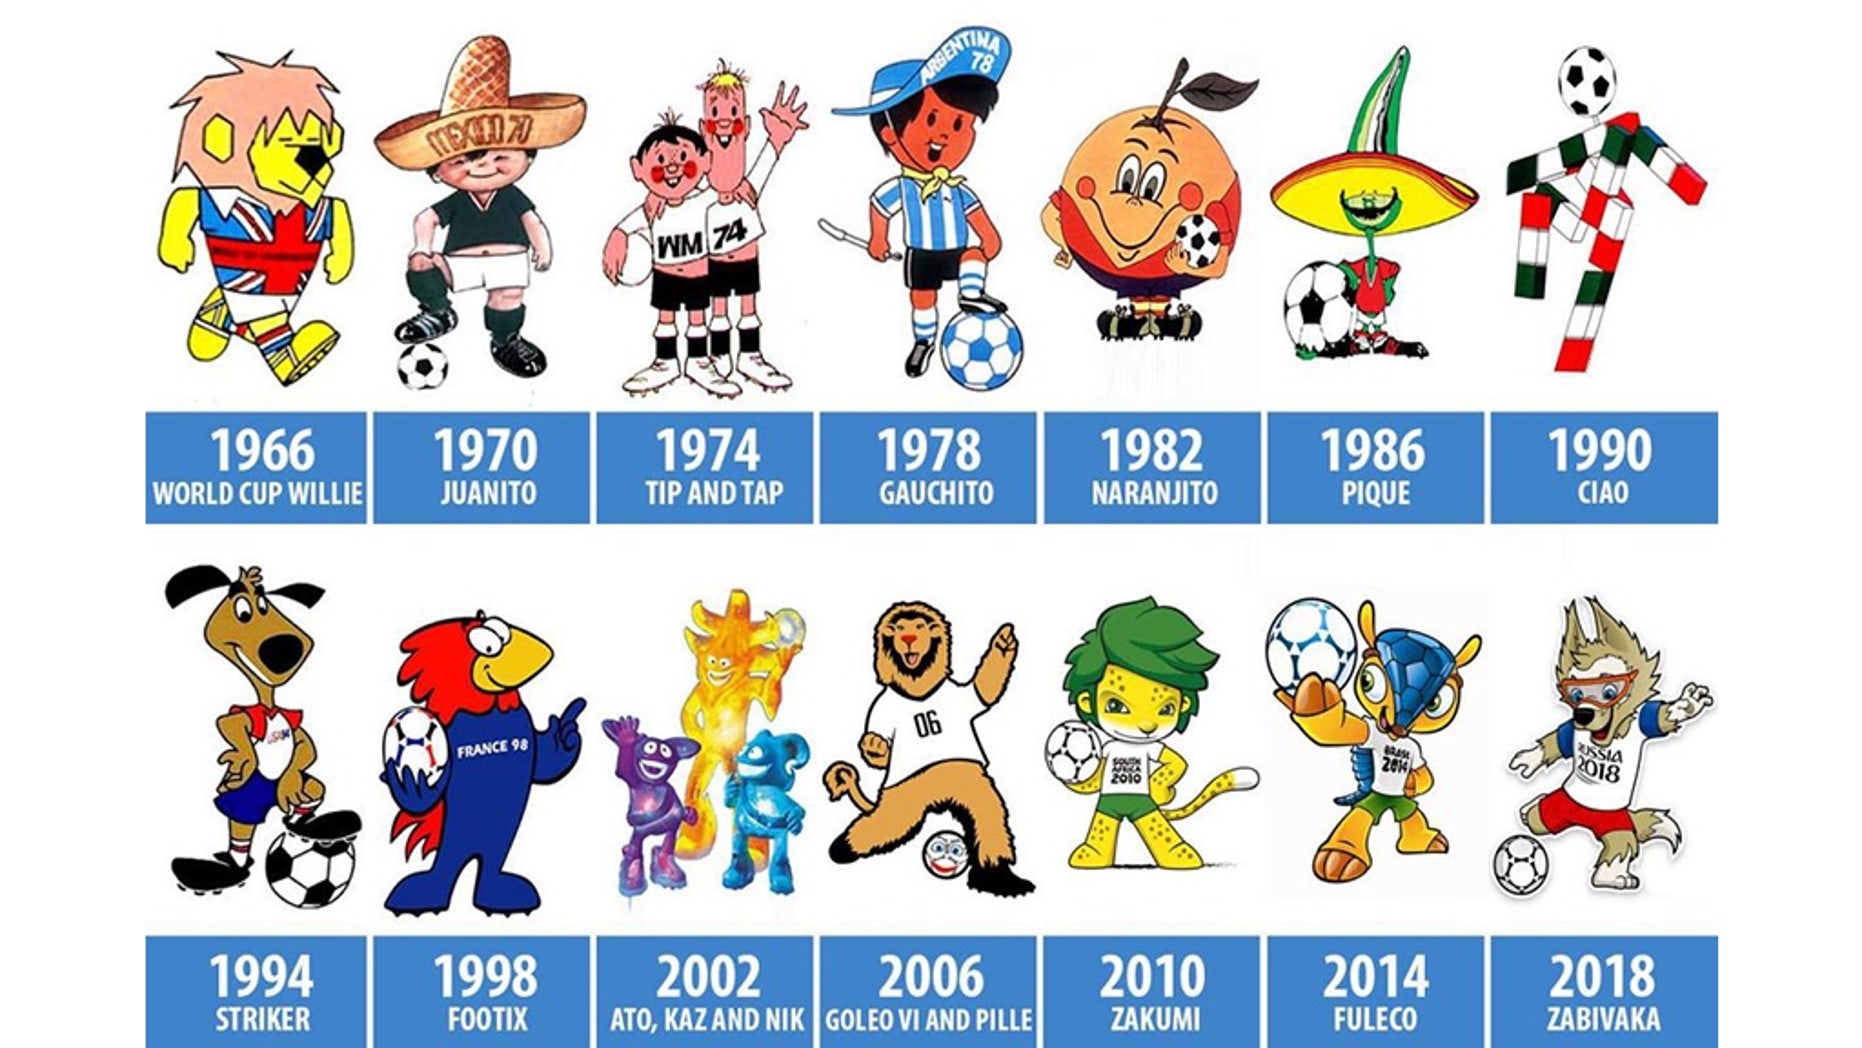  World Cup mascots through the years from Zabivaka to 